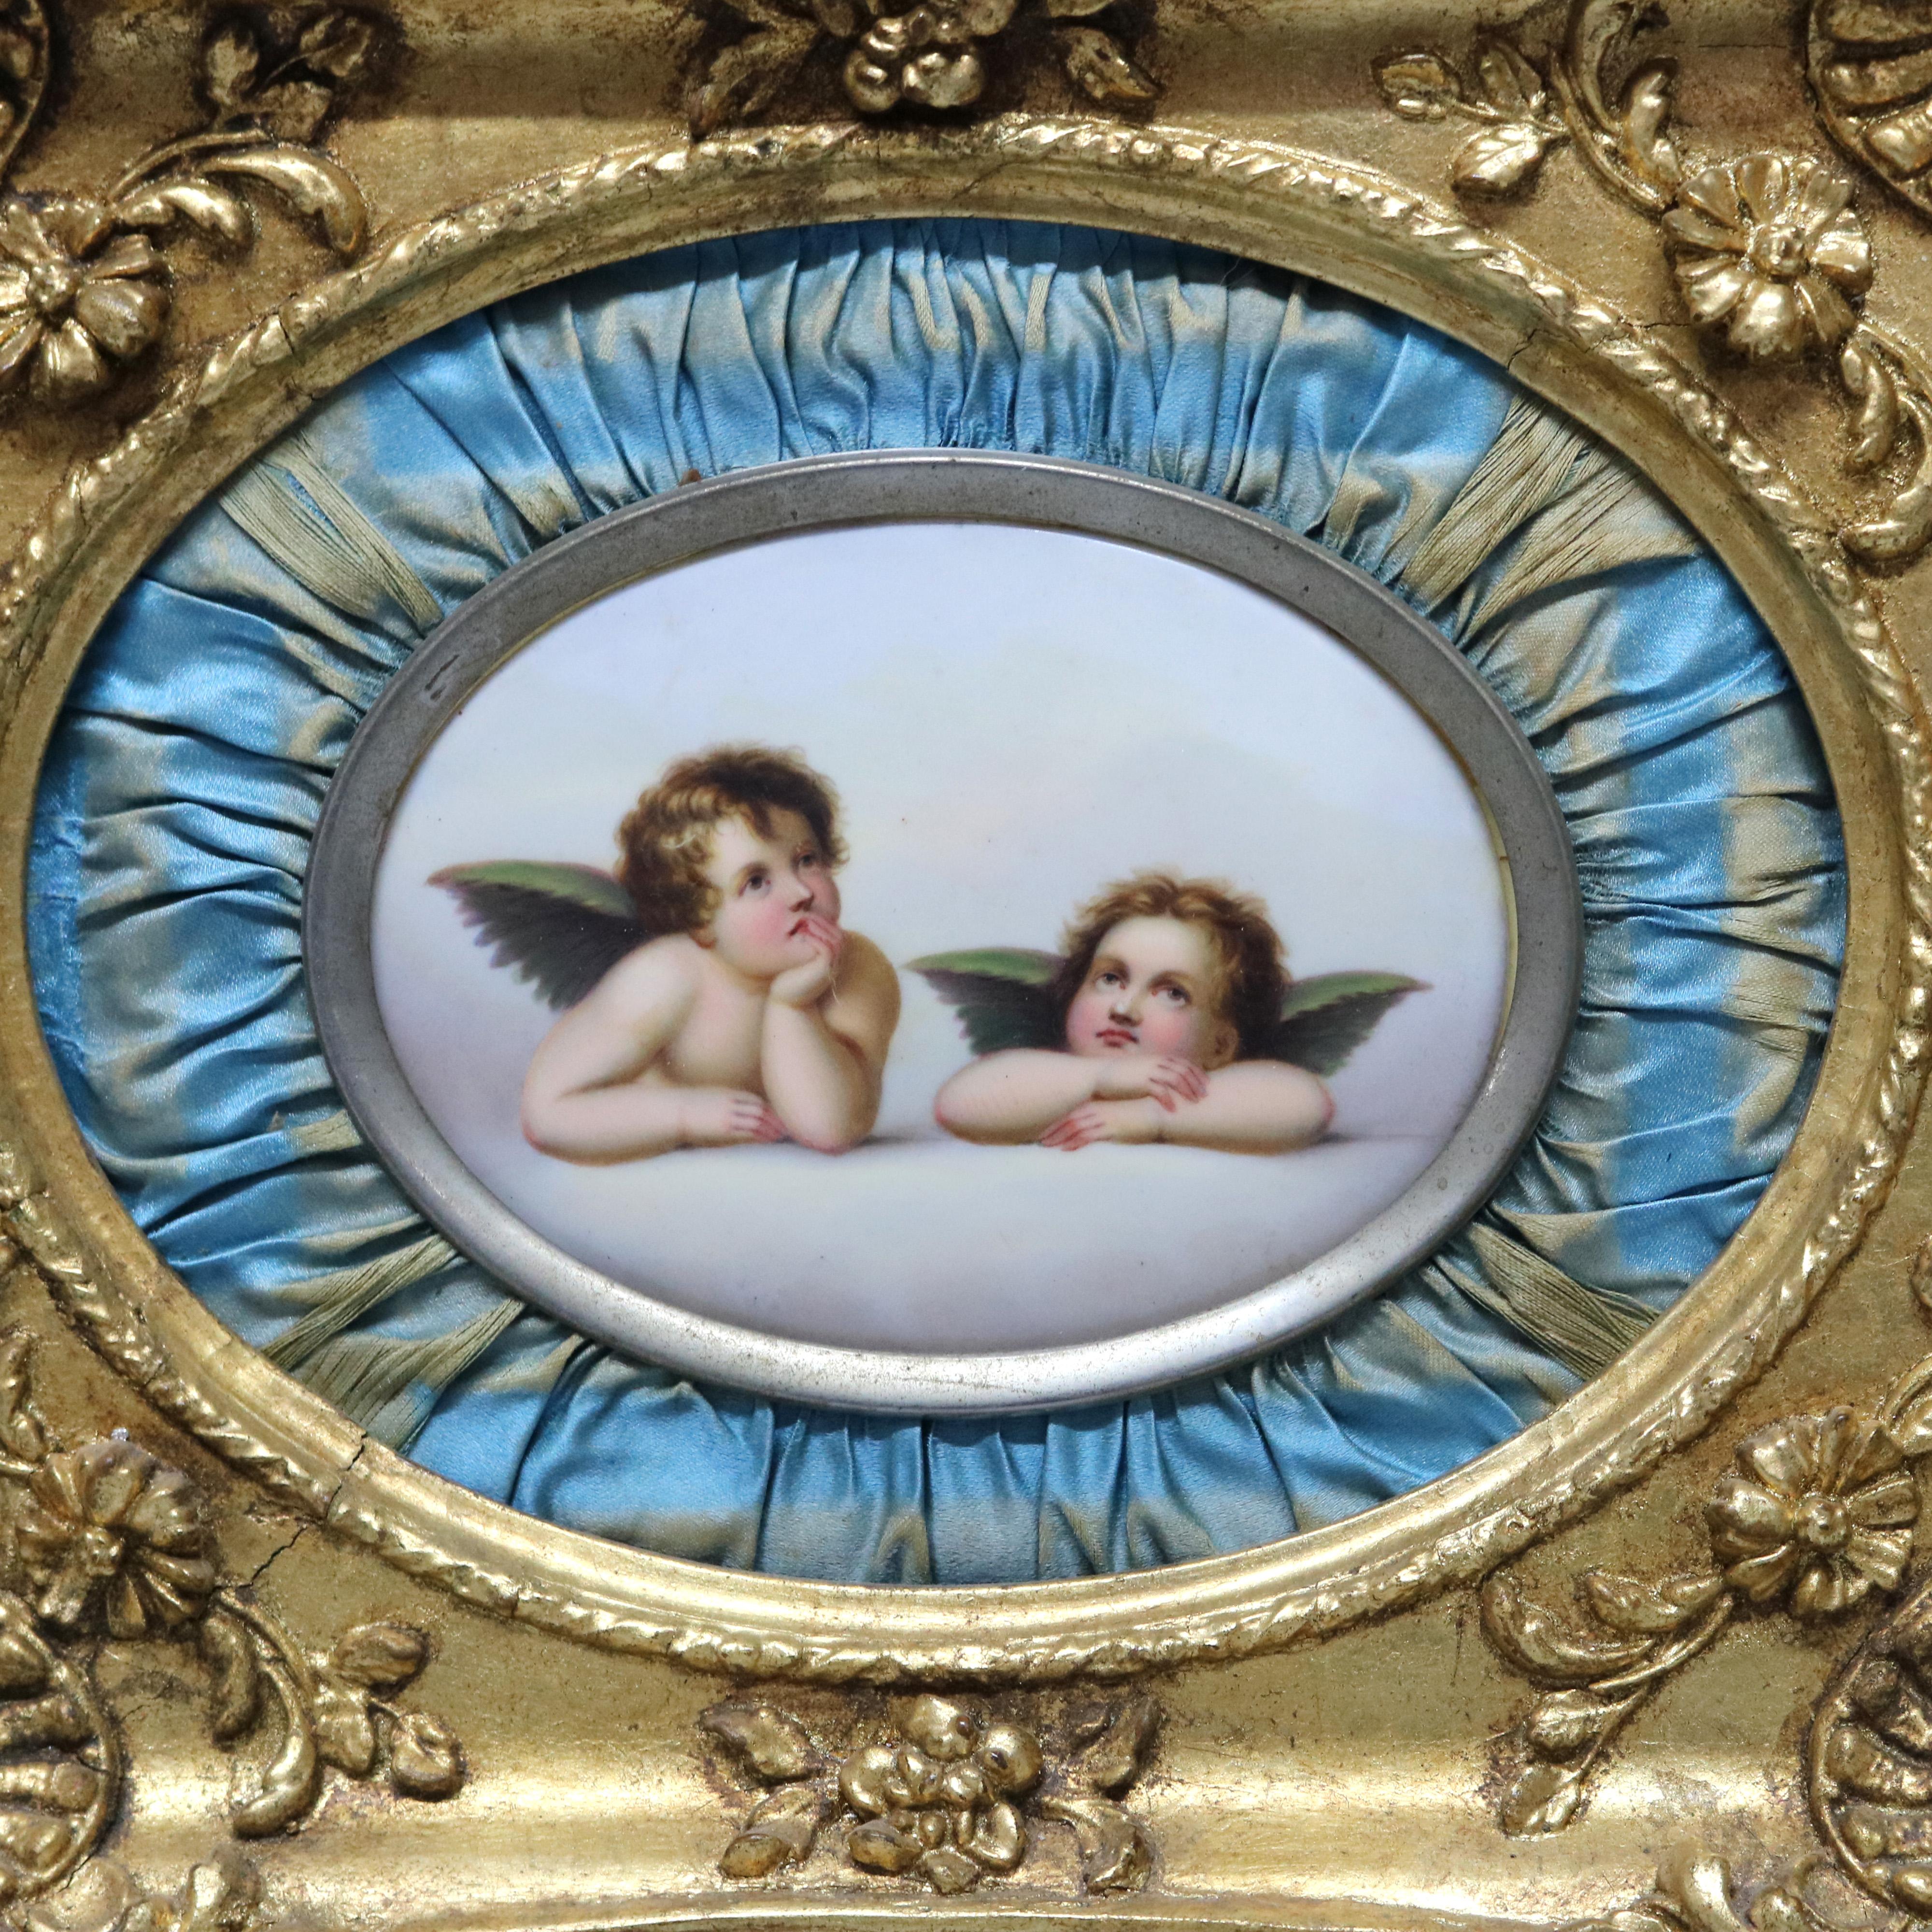 An antique painting on porcelain in the manner of KPM offers two Classical cherubs, seated in satin lined giltwood frame, 19th century

Measures: 10